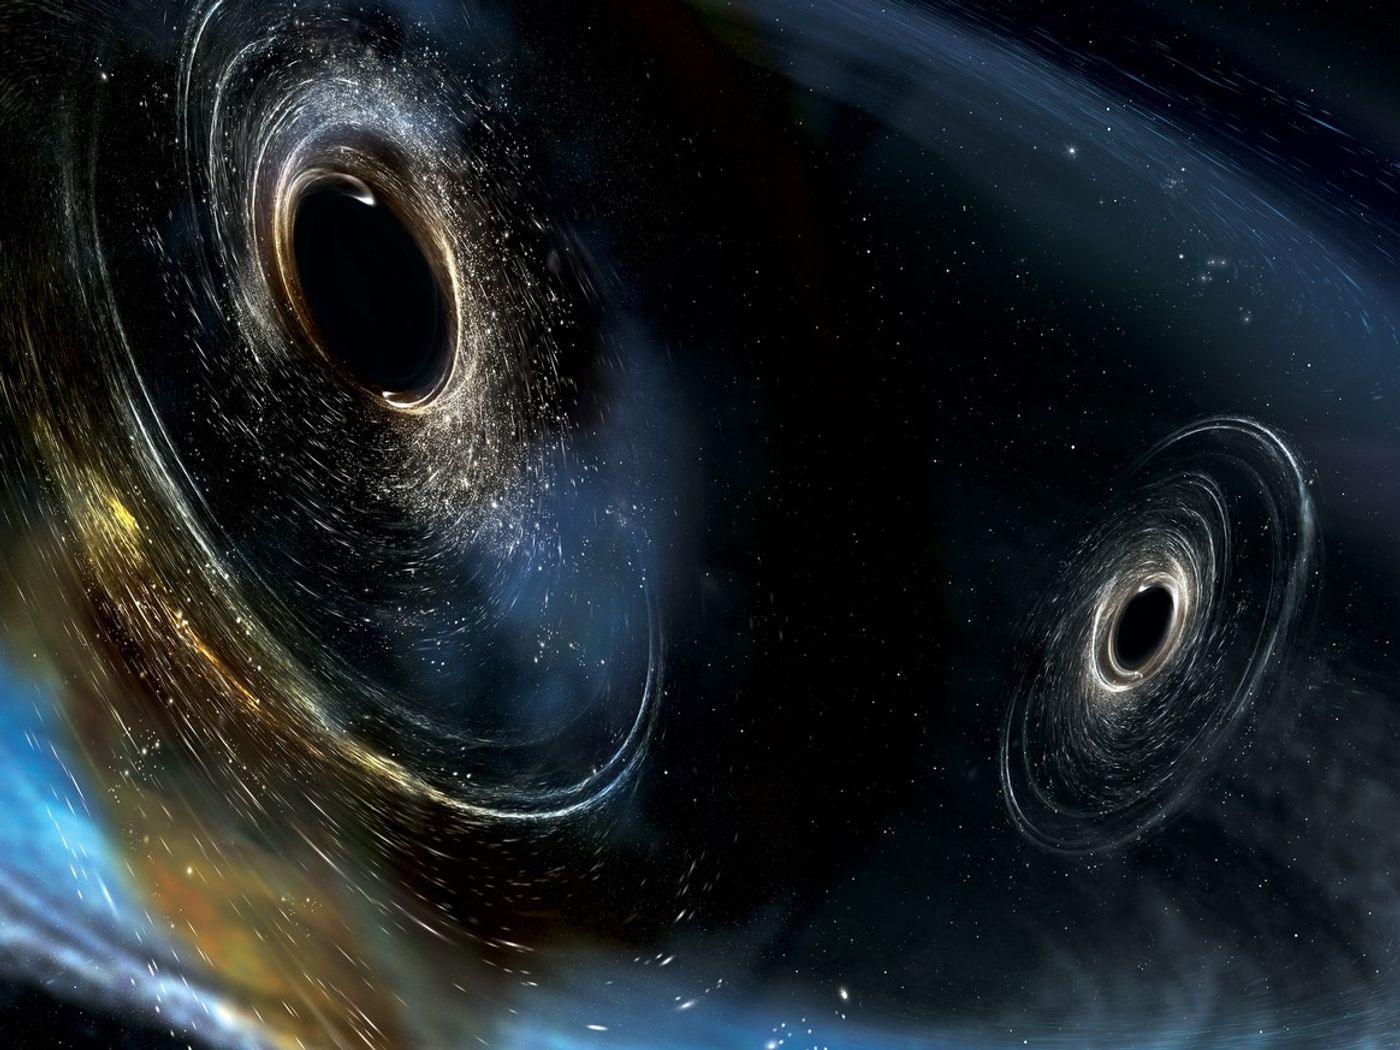 An artist's impression of two black holes merging together to form gravitational waves like those found by LIGO.